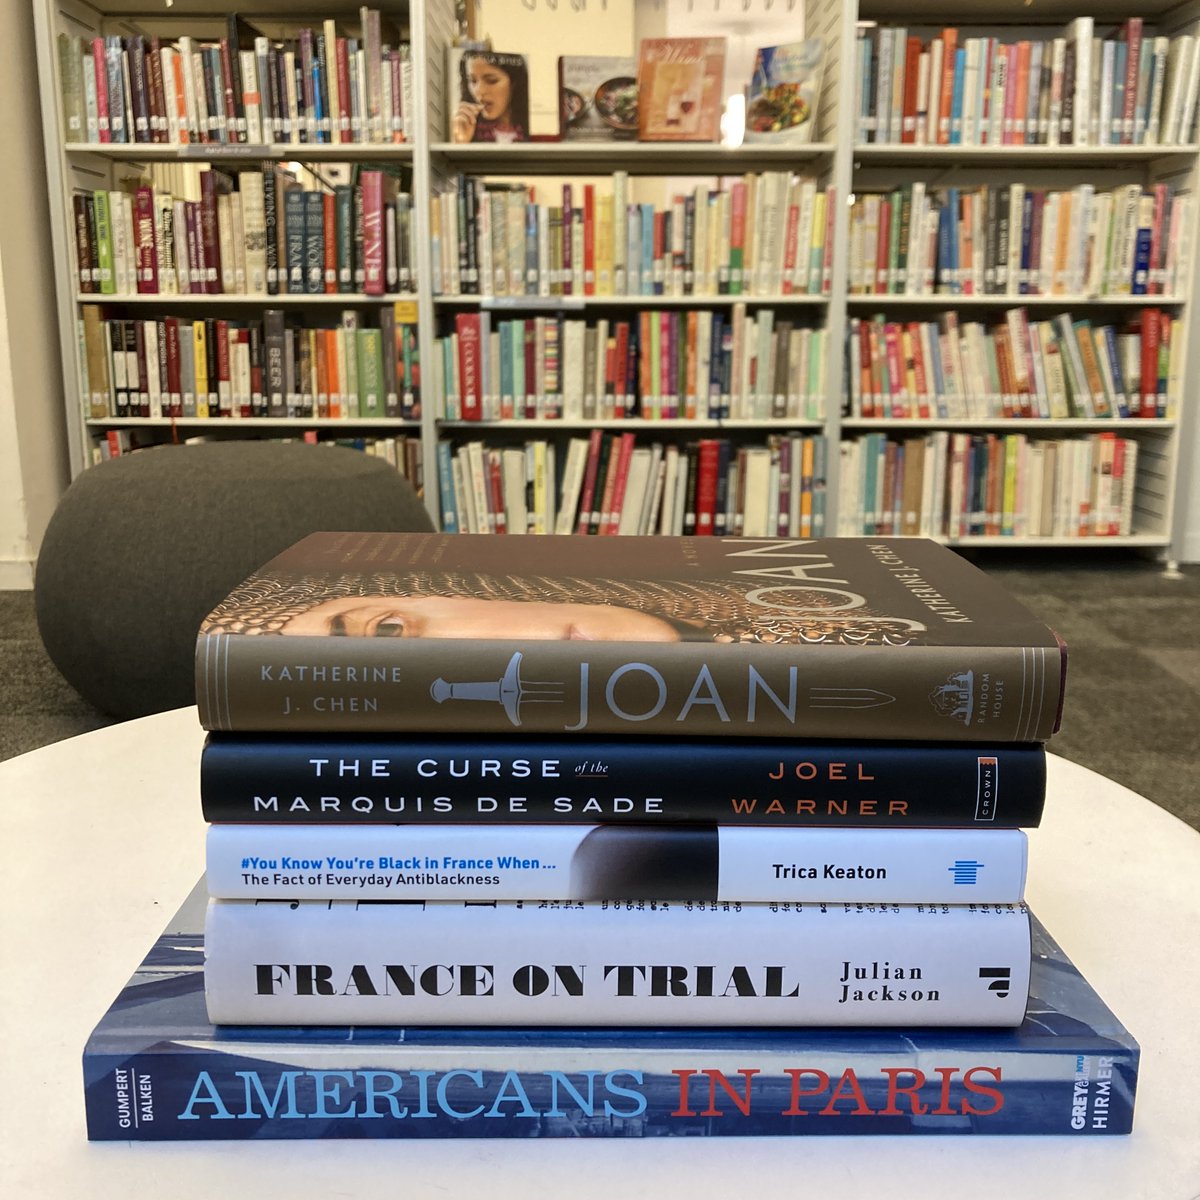 There are just a few weeks to go until we learn the winning title of the American Library in Paris Book Award 2023 📚 🏆! Which of the five shortlisted titles (pictured) have you already read? #alpbookaward #americanlibraryinparis #literaryprizes #readingrecommendation